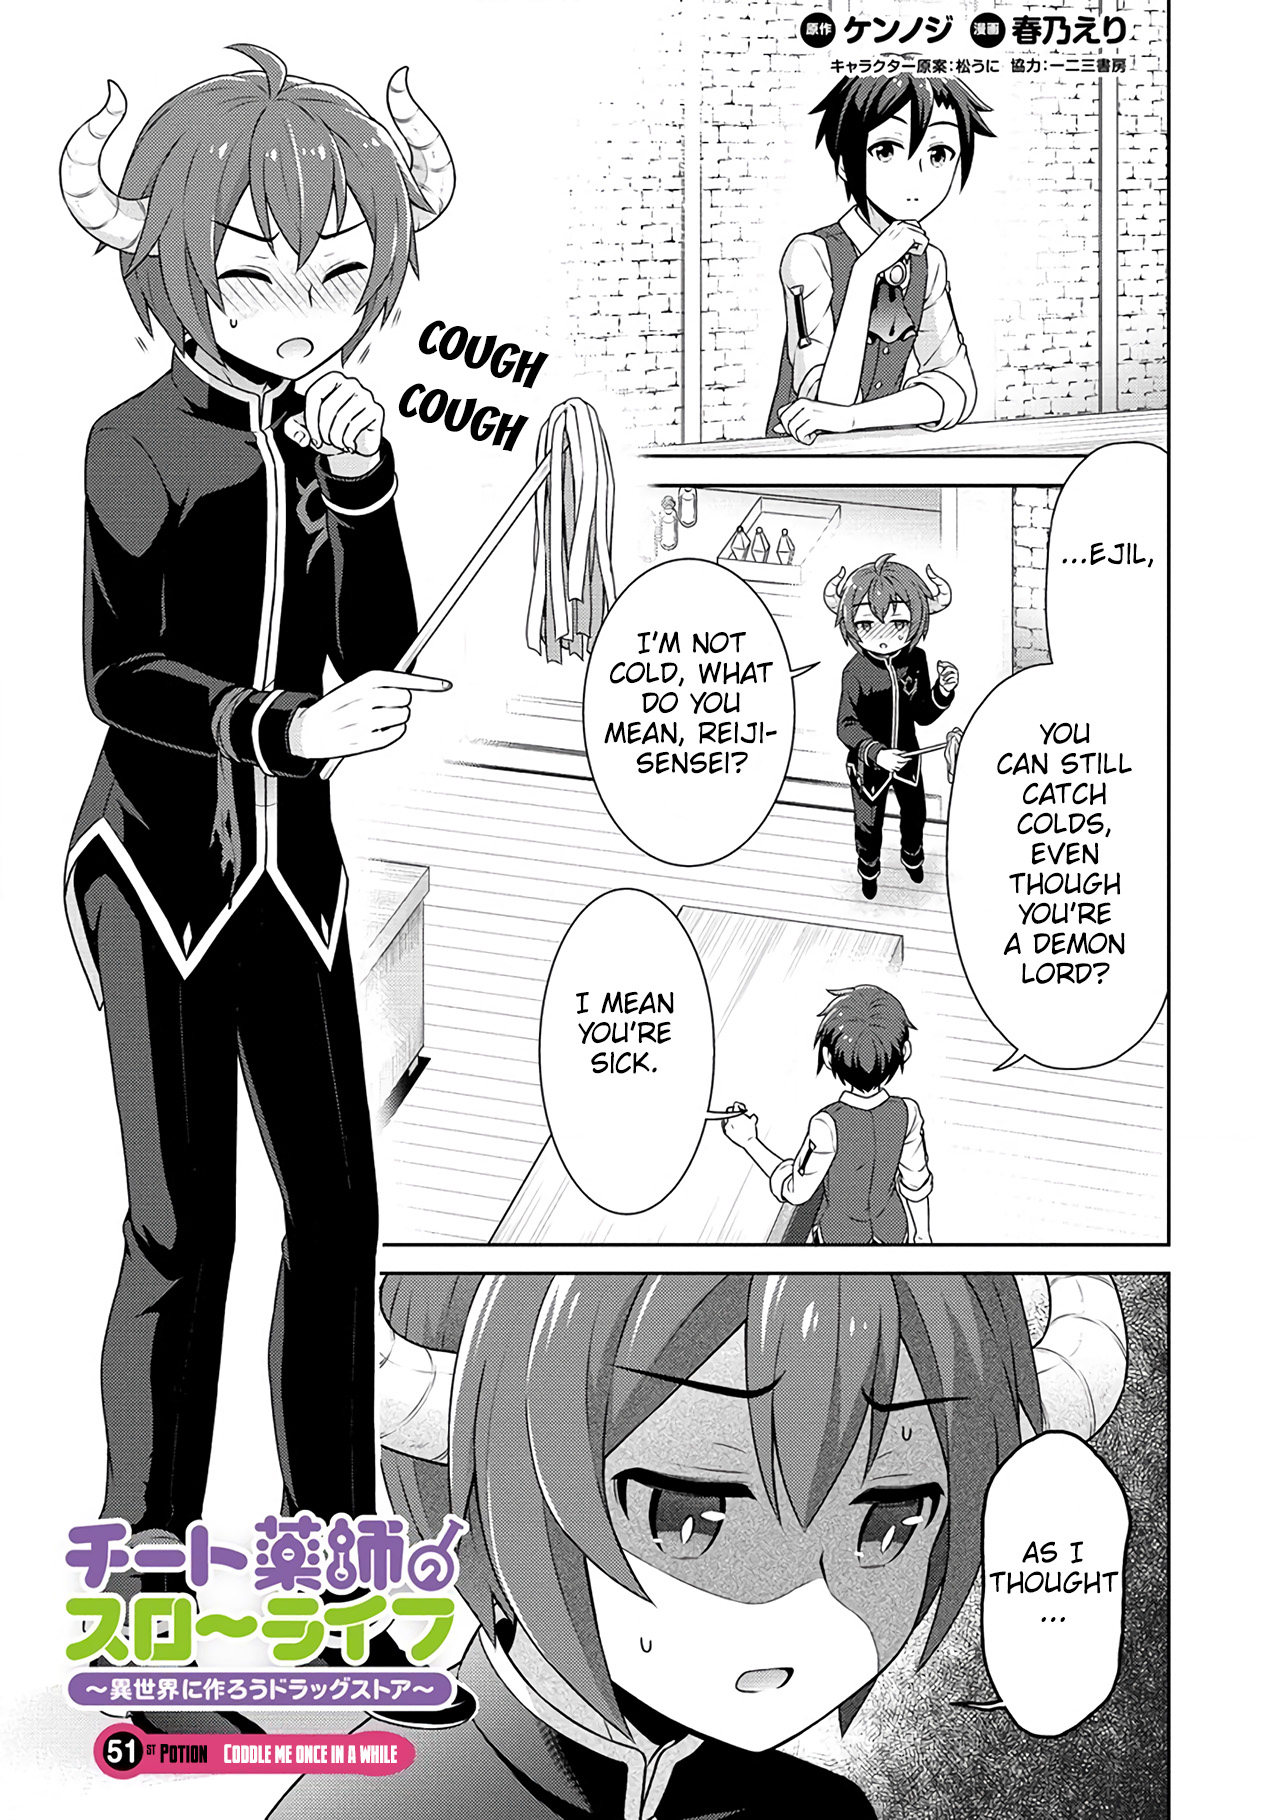 Cheat Kusushi No Slow Life: Isekai Ni Tsukurou Drugstore Vol.10 Chapter 51: Coddle Me Once In A While - Picture 2